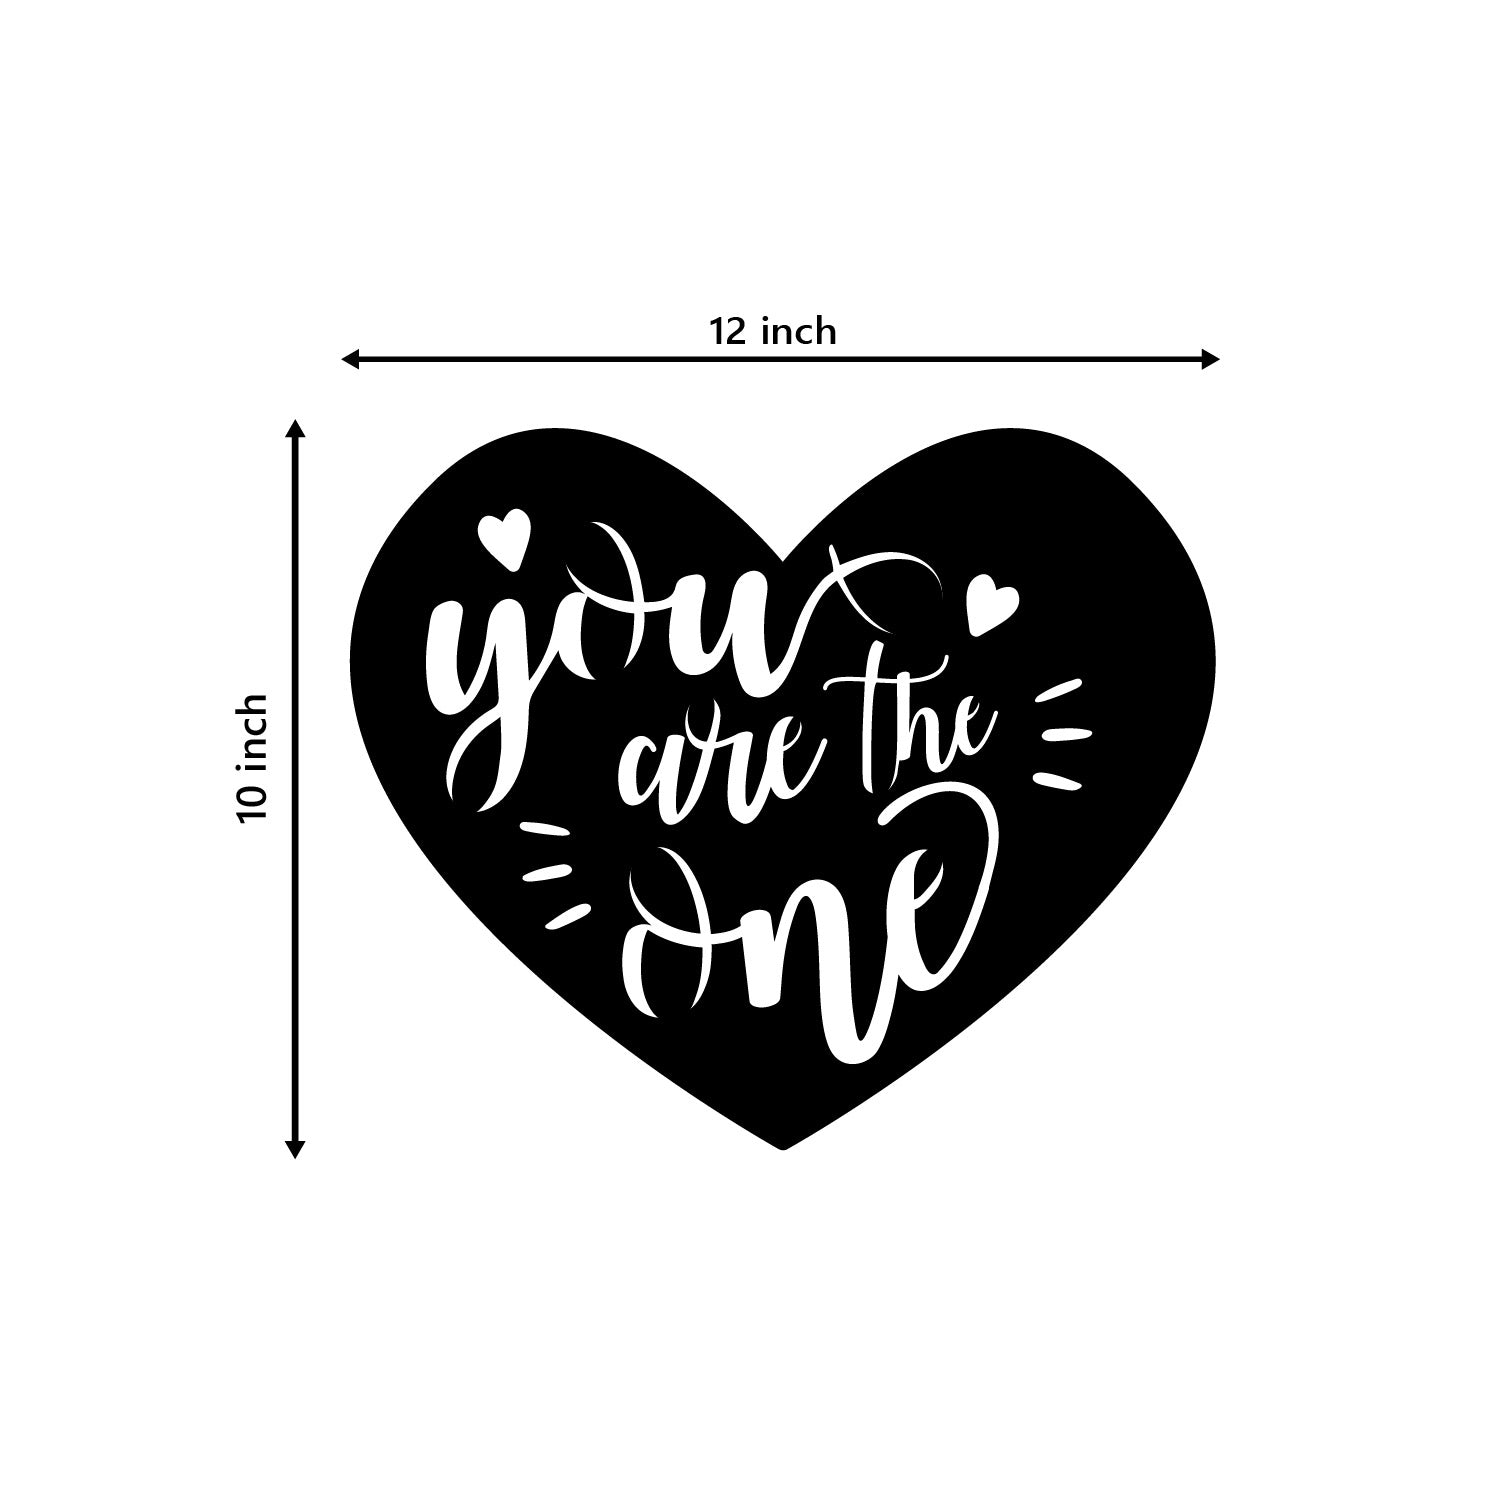 "You are the One" Love Theme Black Engineered Wood Wall Art Cutout, Ready to Hang Home Decor 3